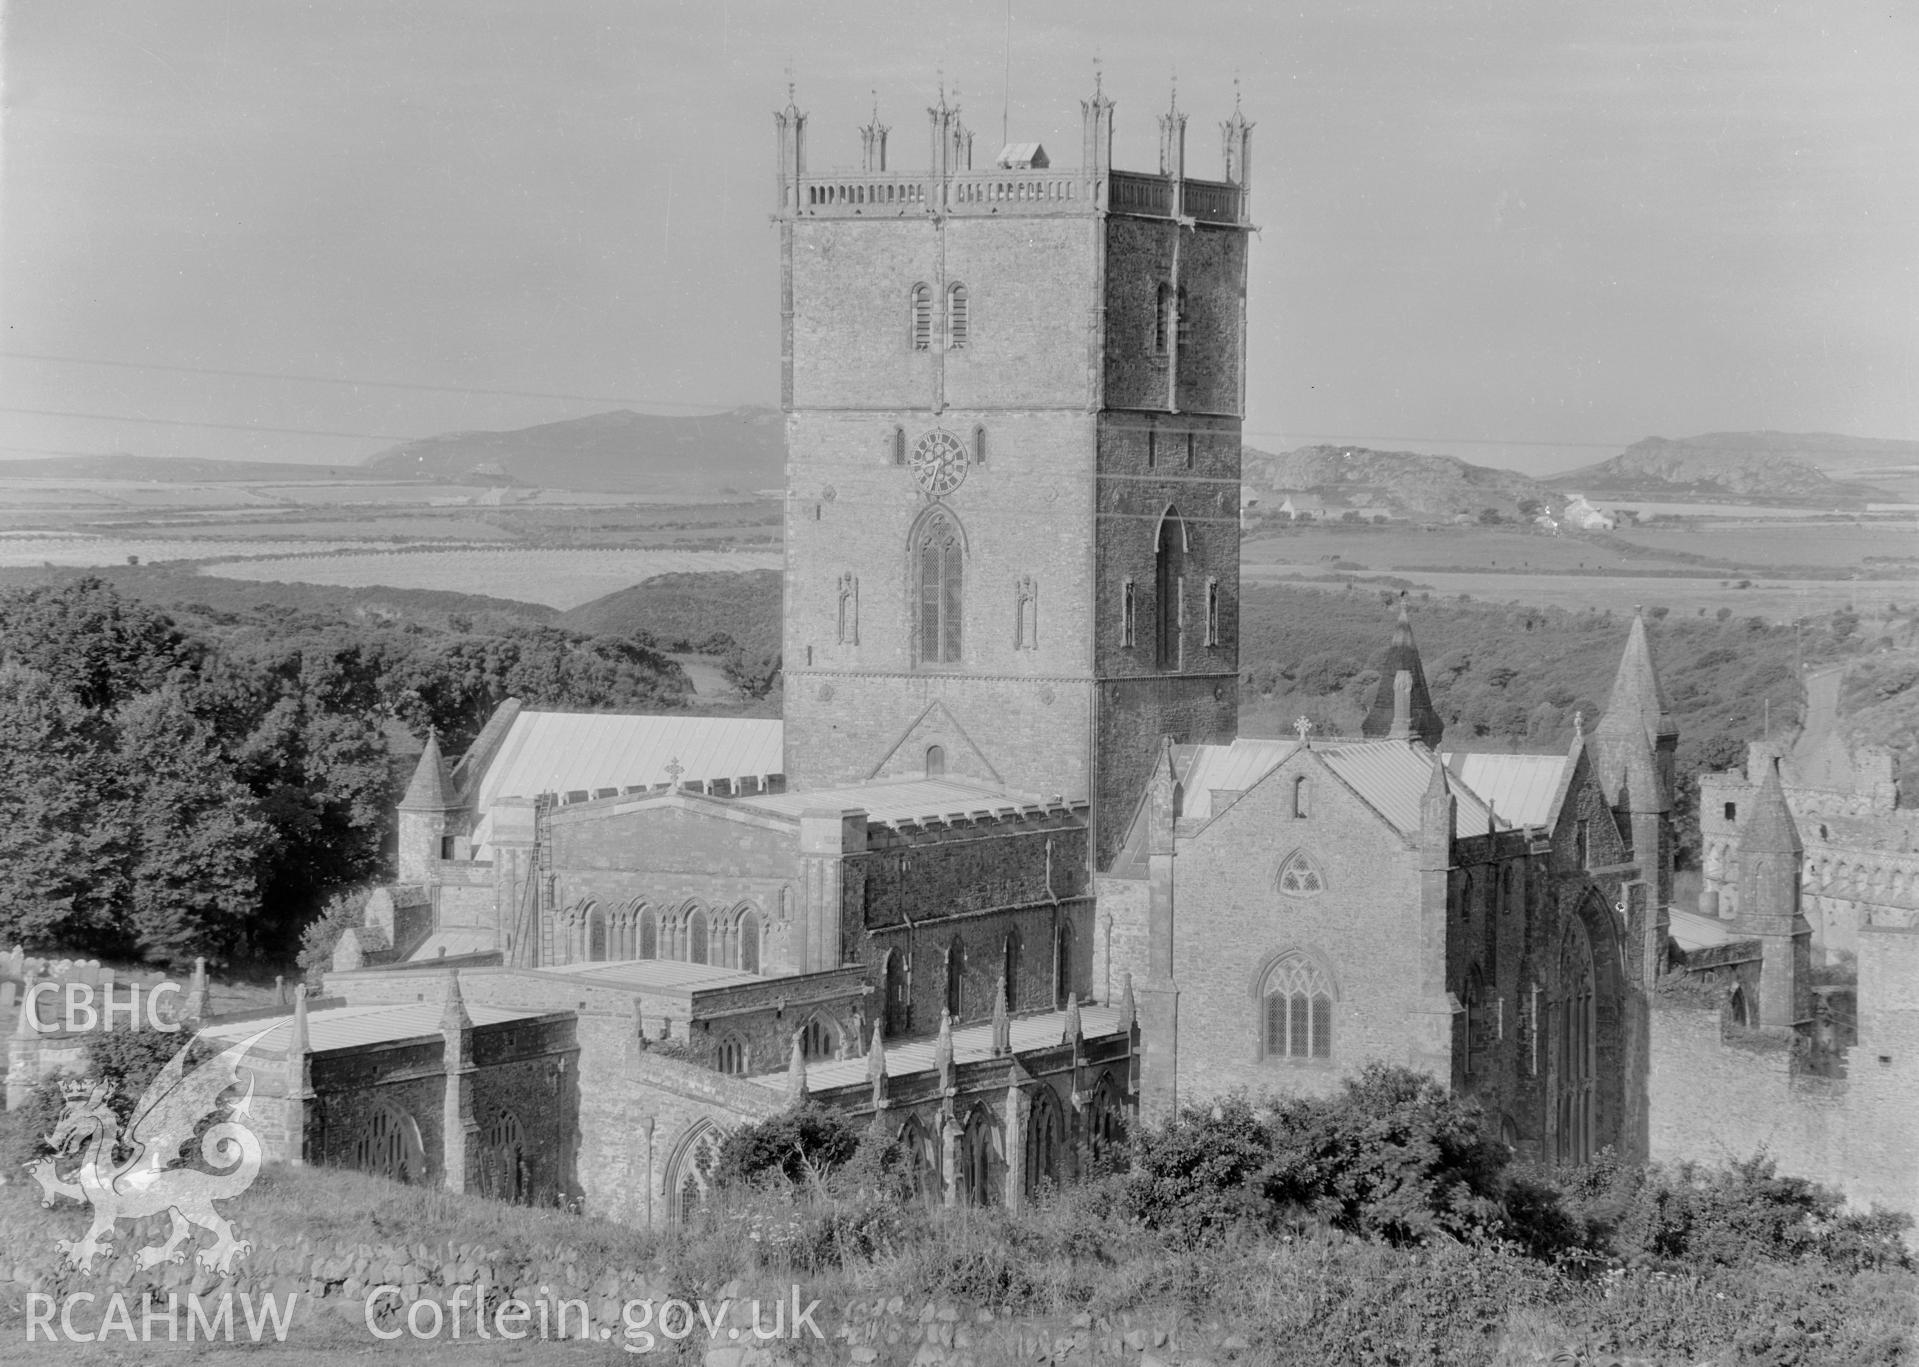 Digital copy of a black and white acetate negative showing landscape view of St. David's Cathedral, taken by E.W. Lovegrove, July 1936